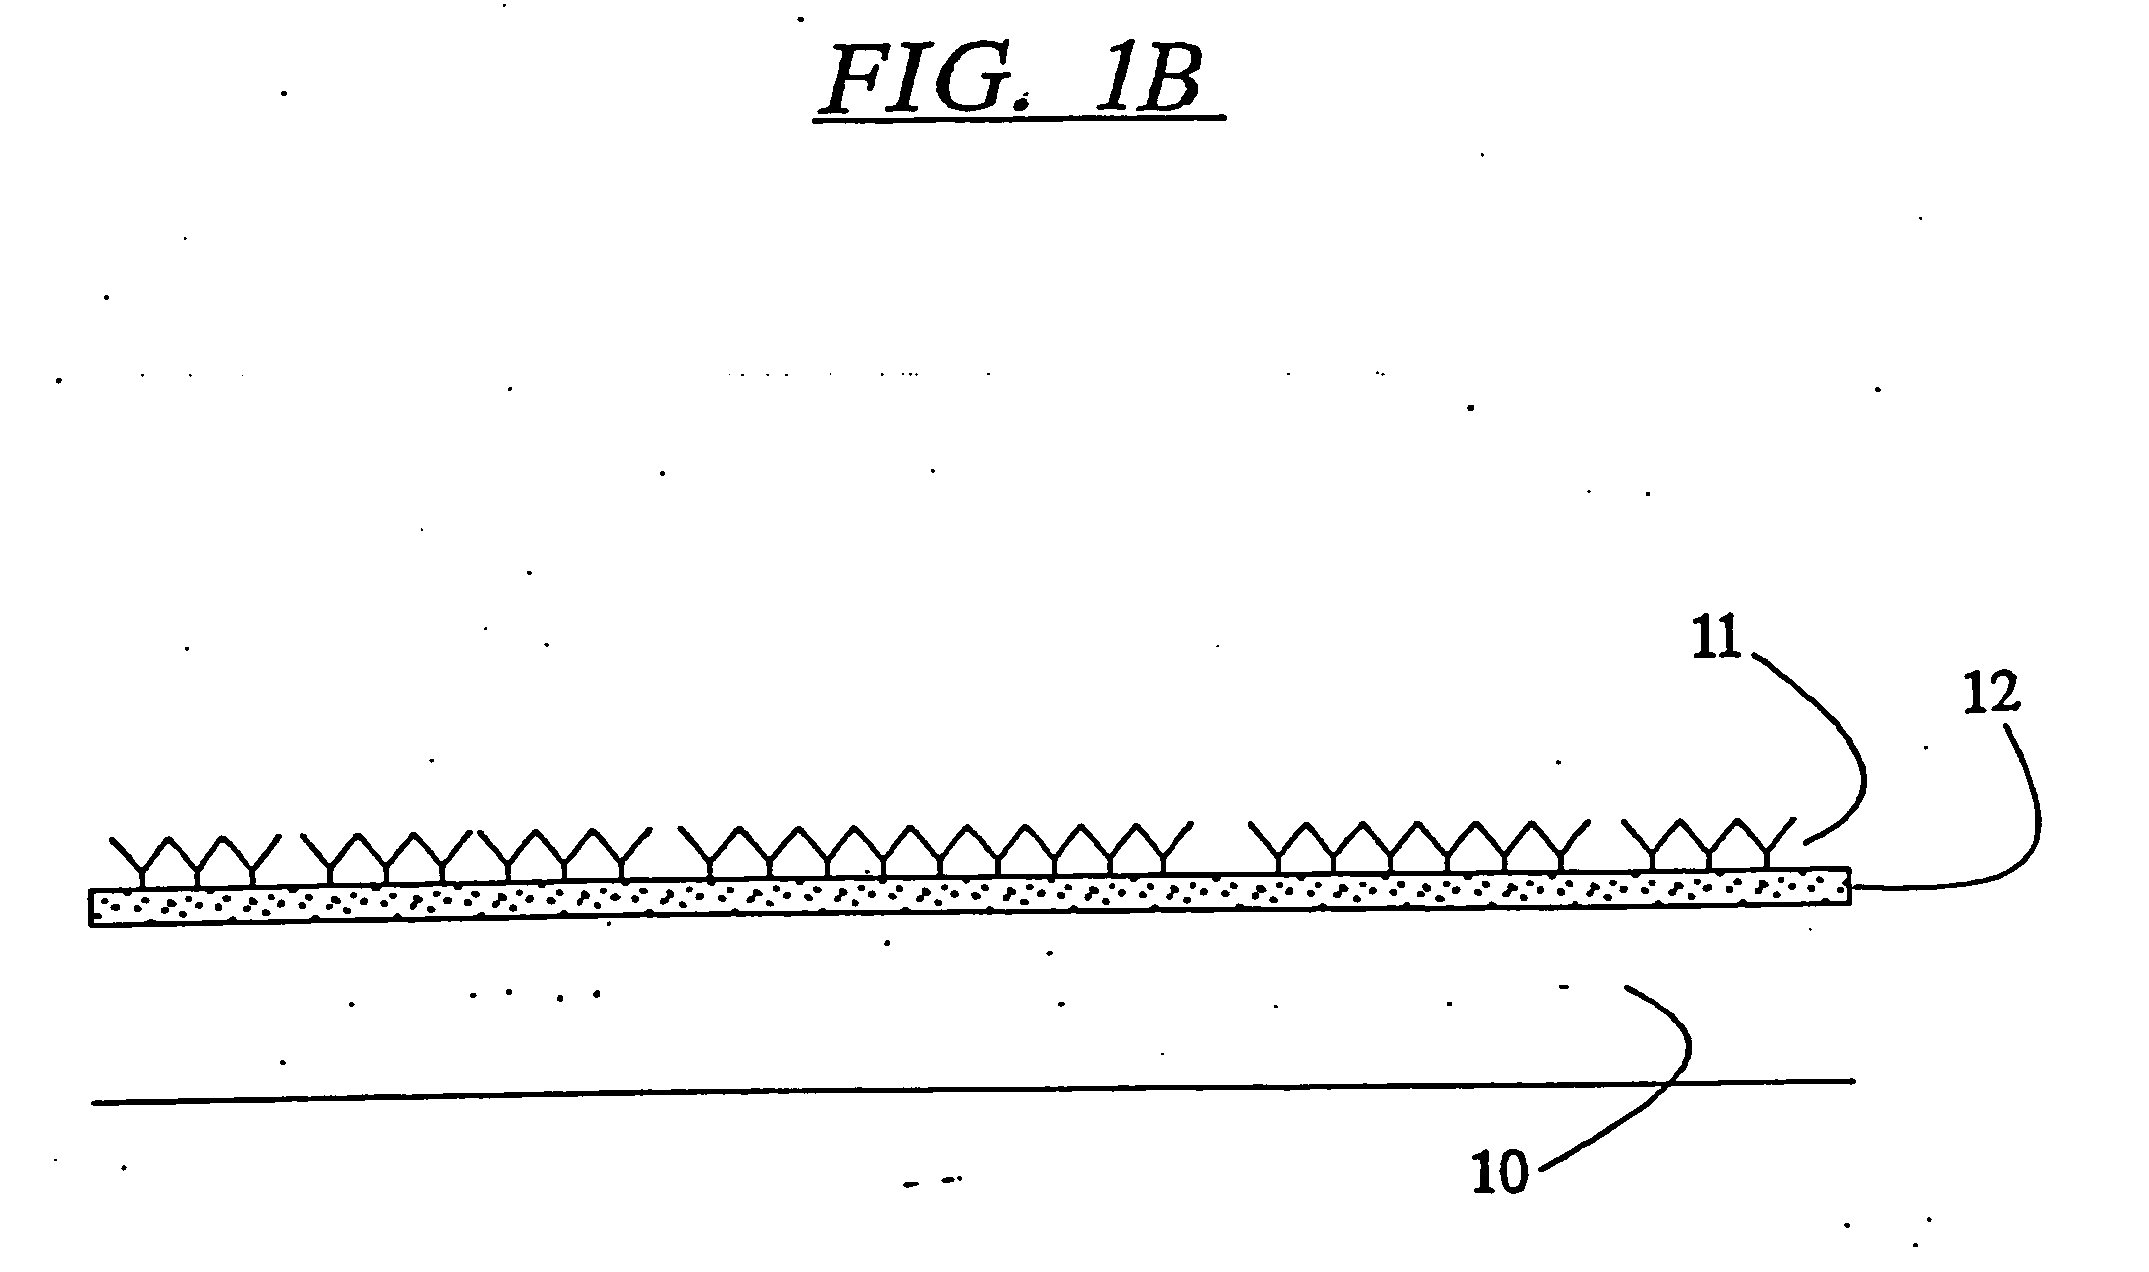 Affinity based system for detecting particulates in a fluid